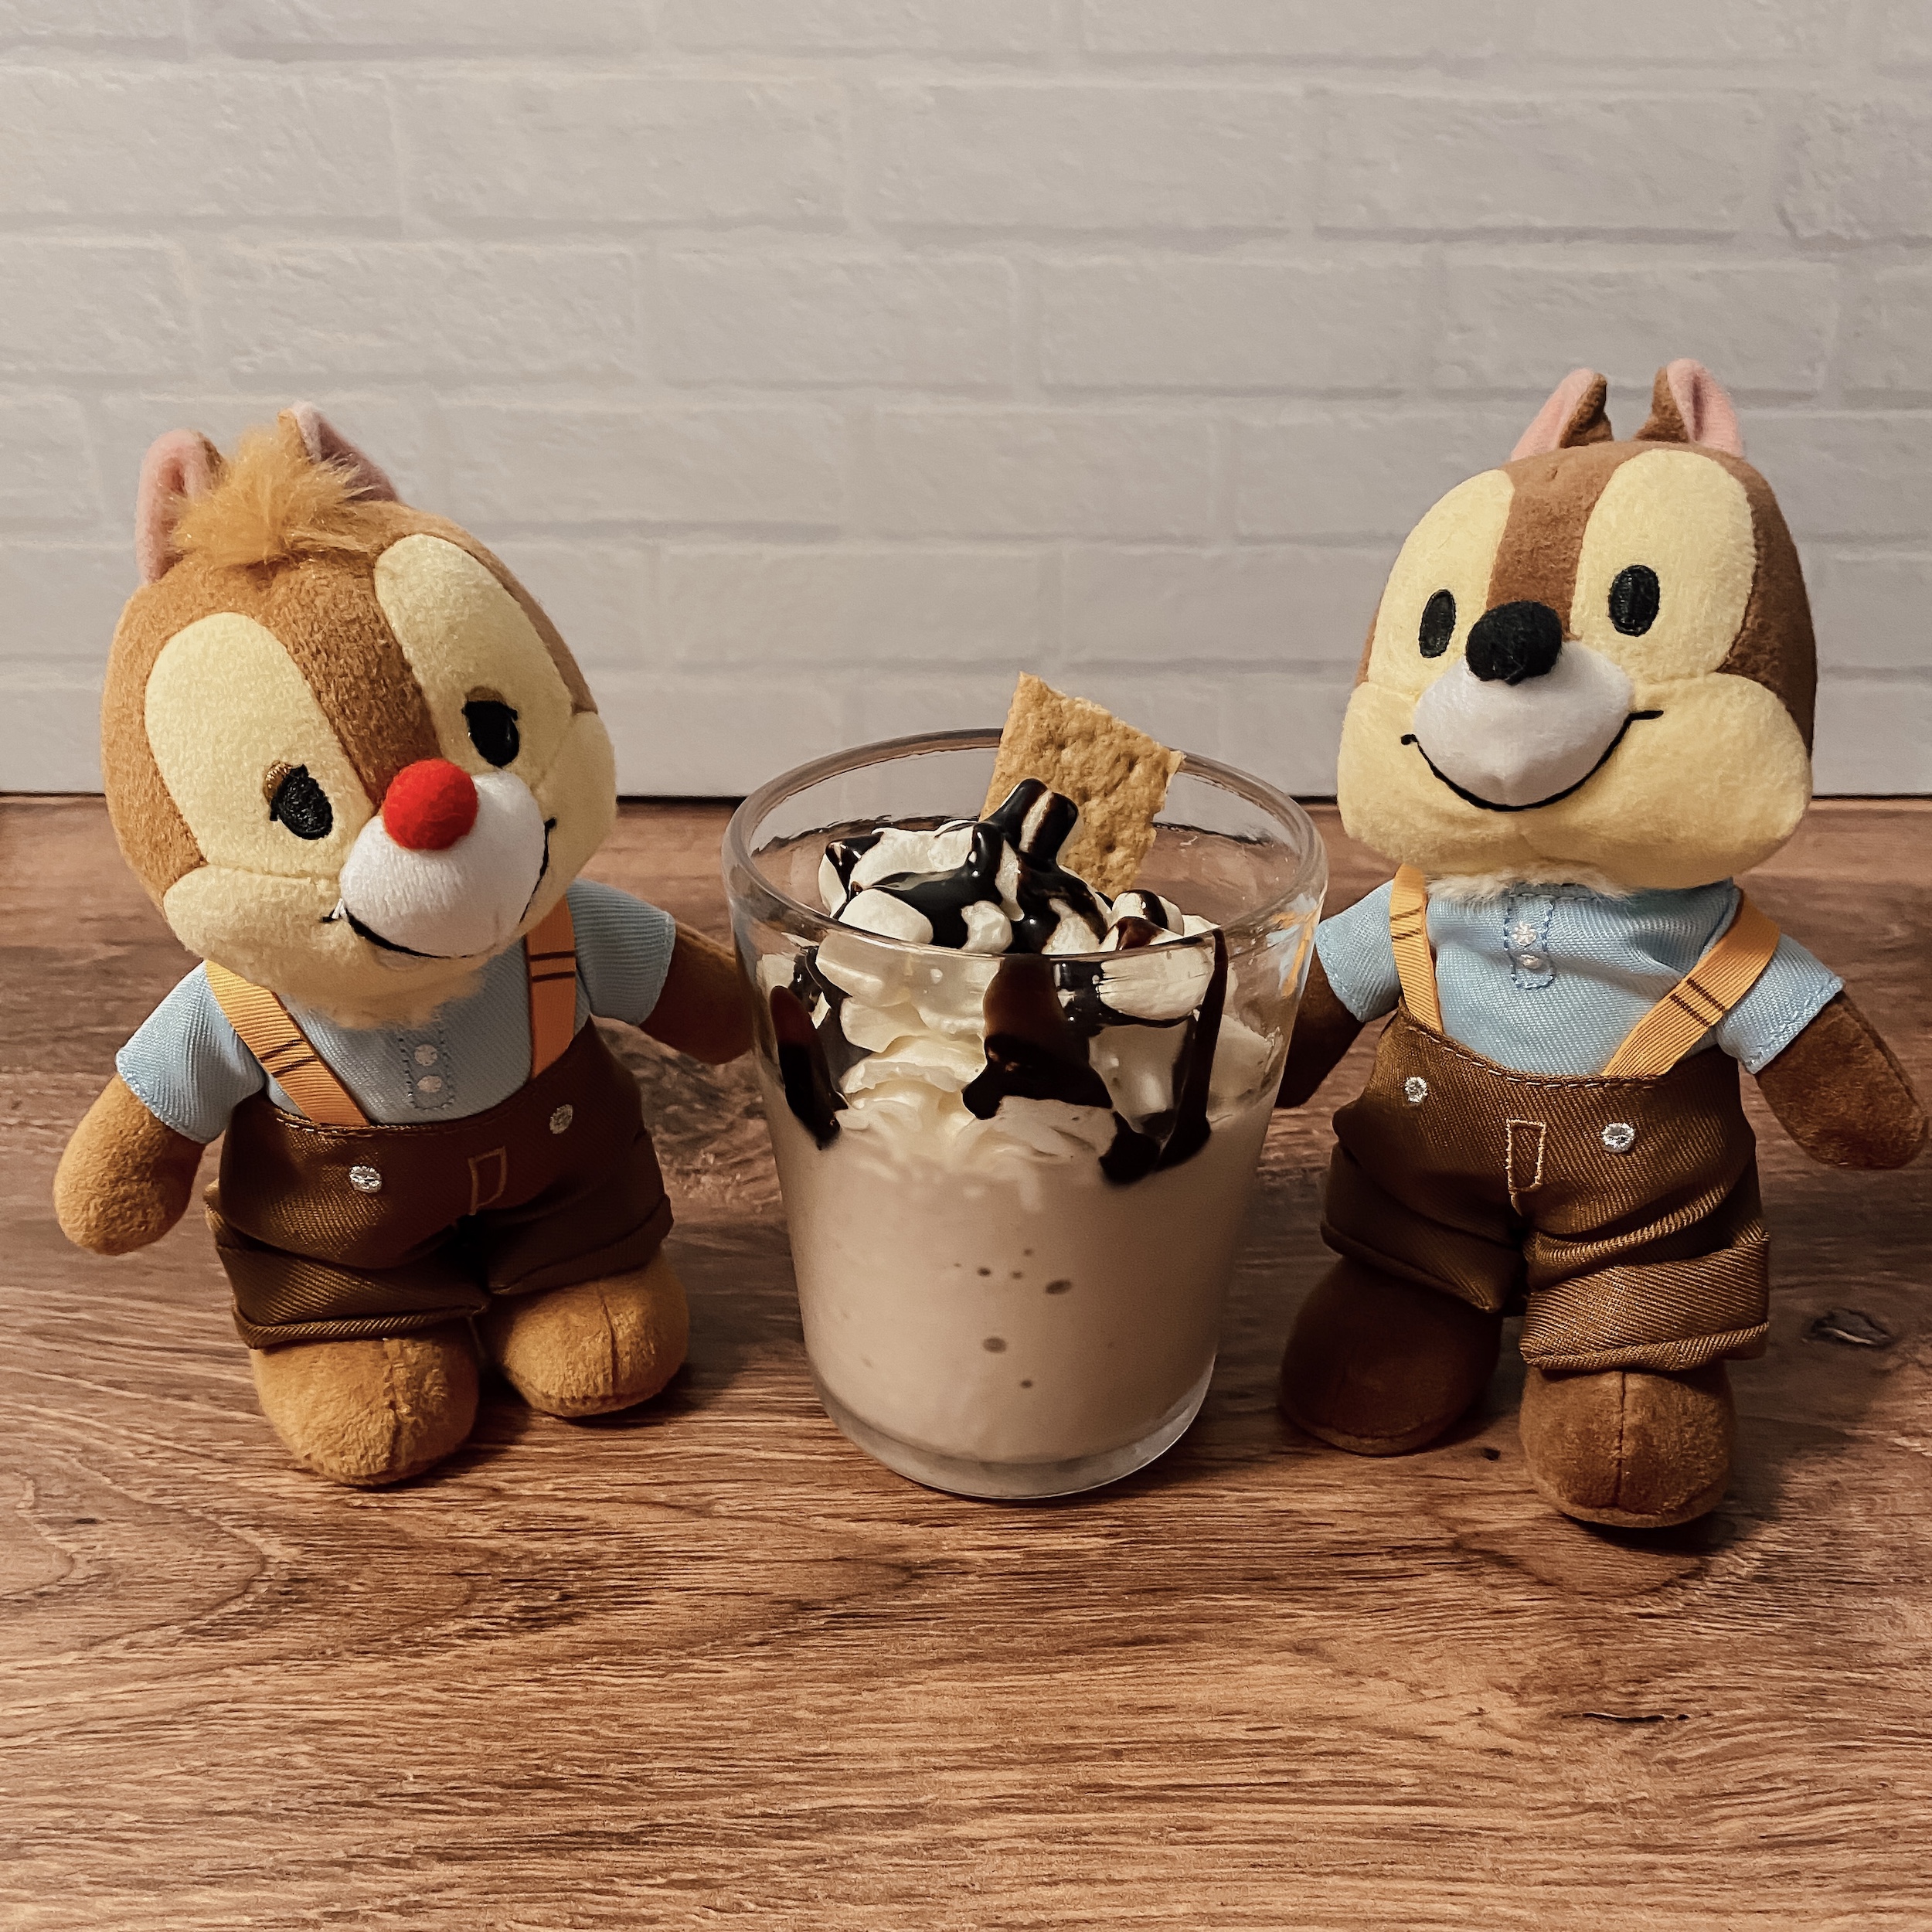 Disney Parks S'mores Milkshakes with Chip and Dale plushies